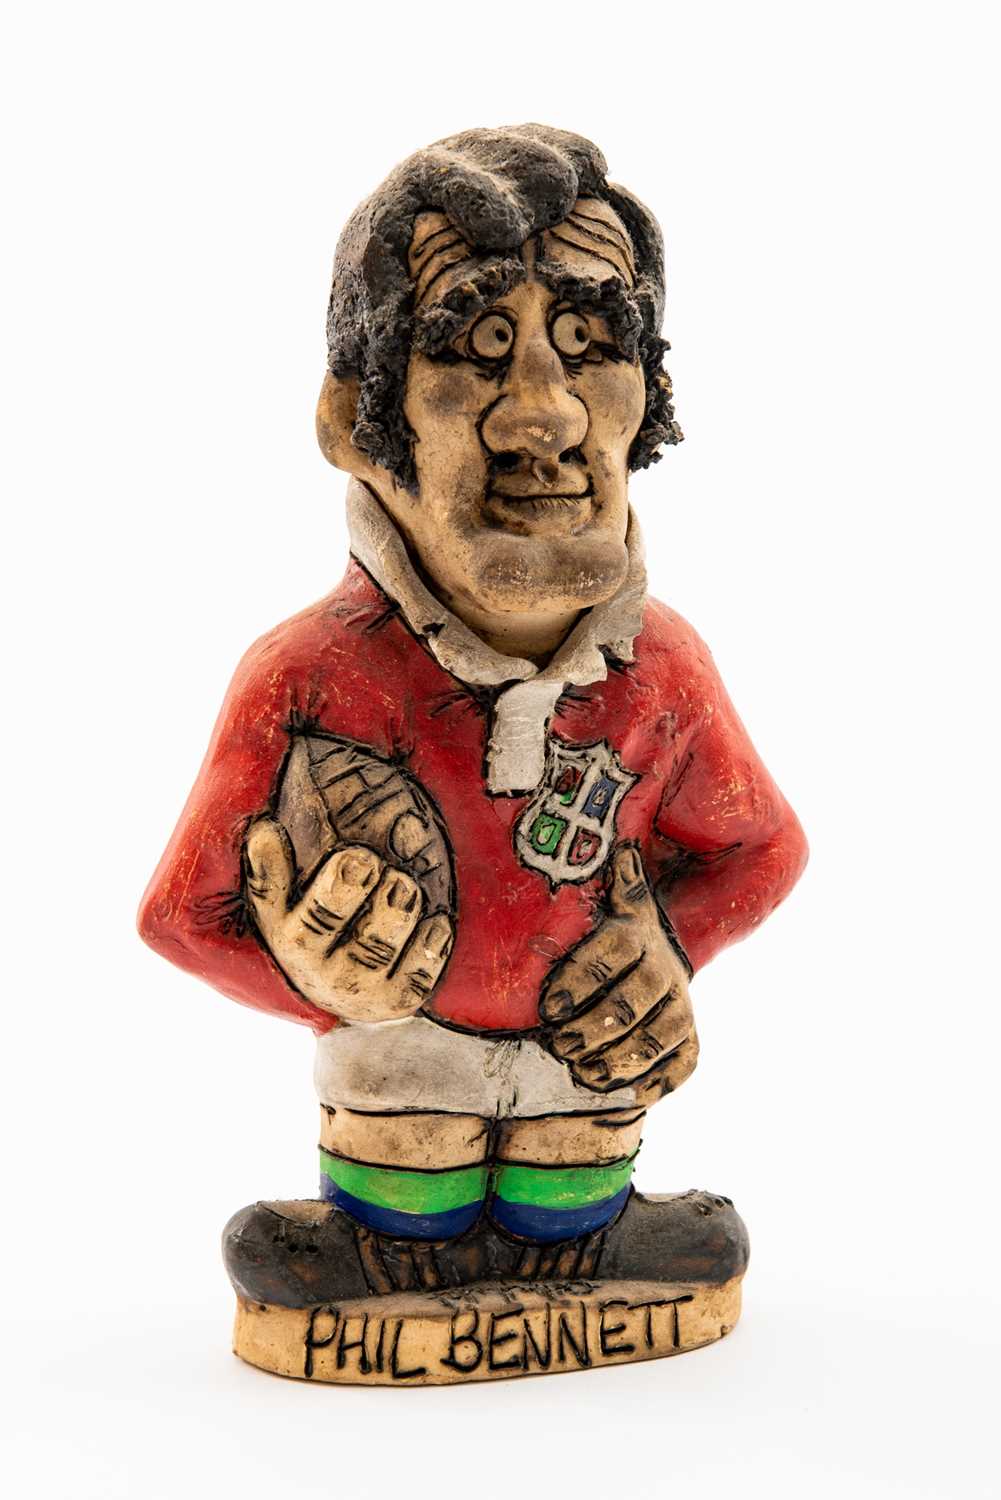 GROGG CARICATURE BY JOHN HUGHES OF PHIL BENNETT standing on titled base, wearing his British Lions